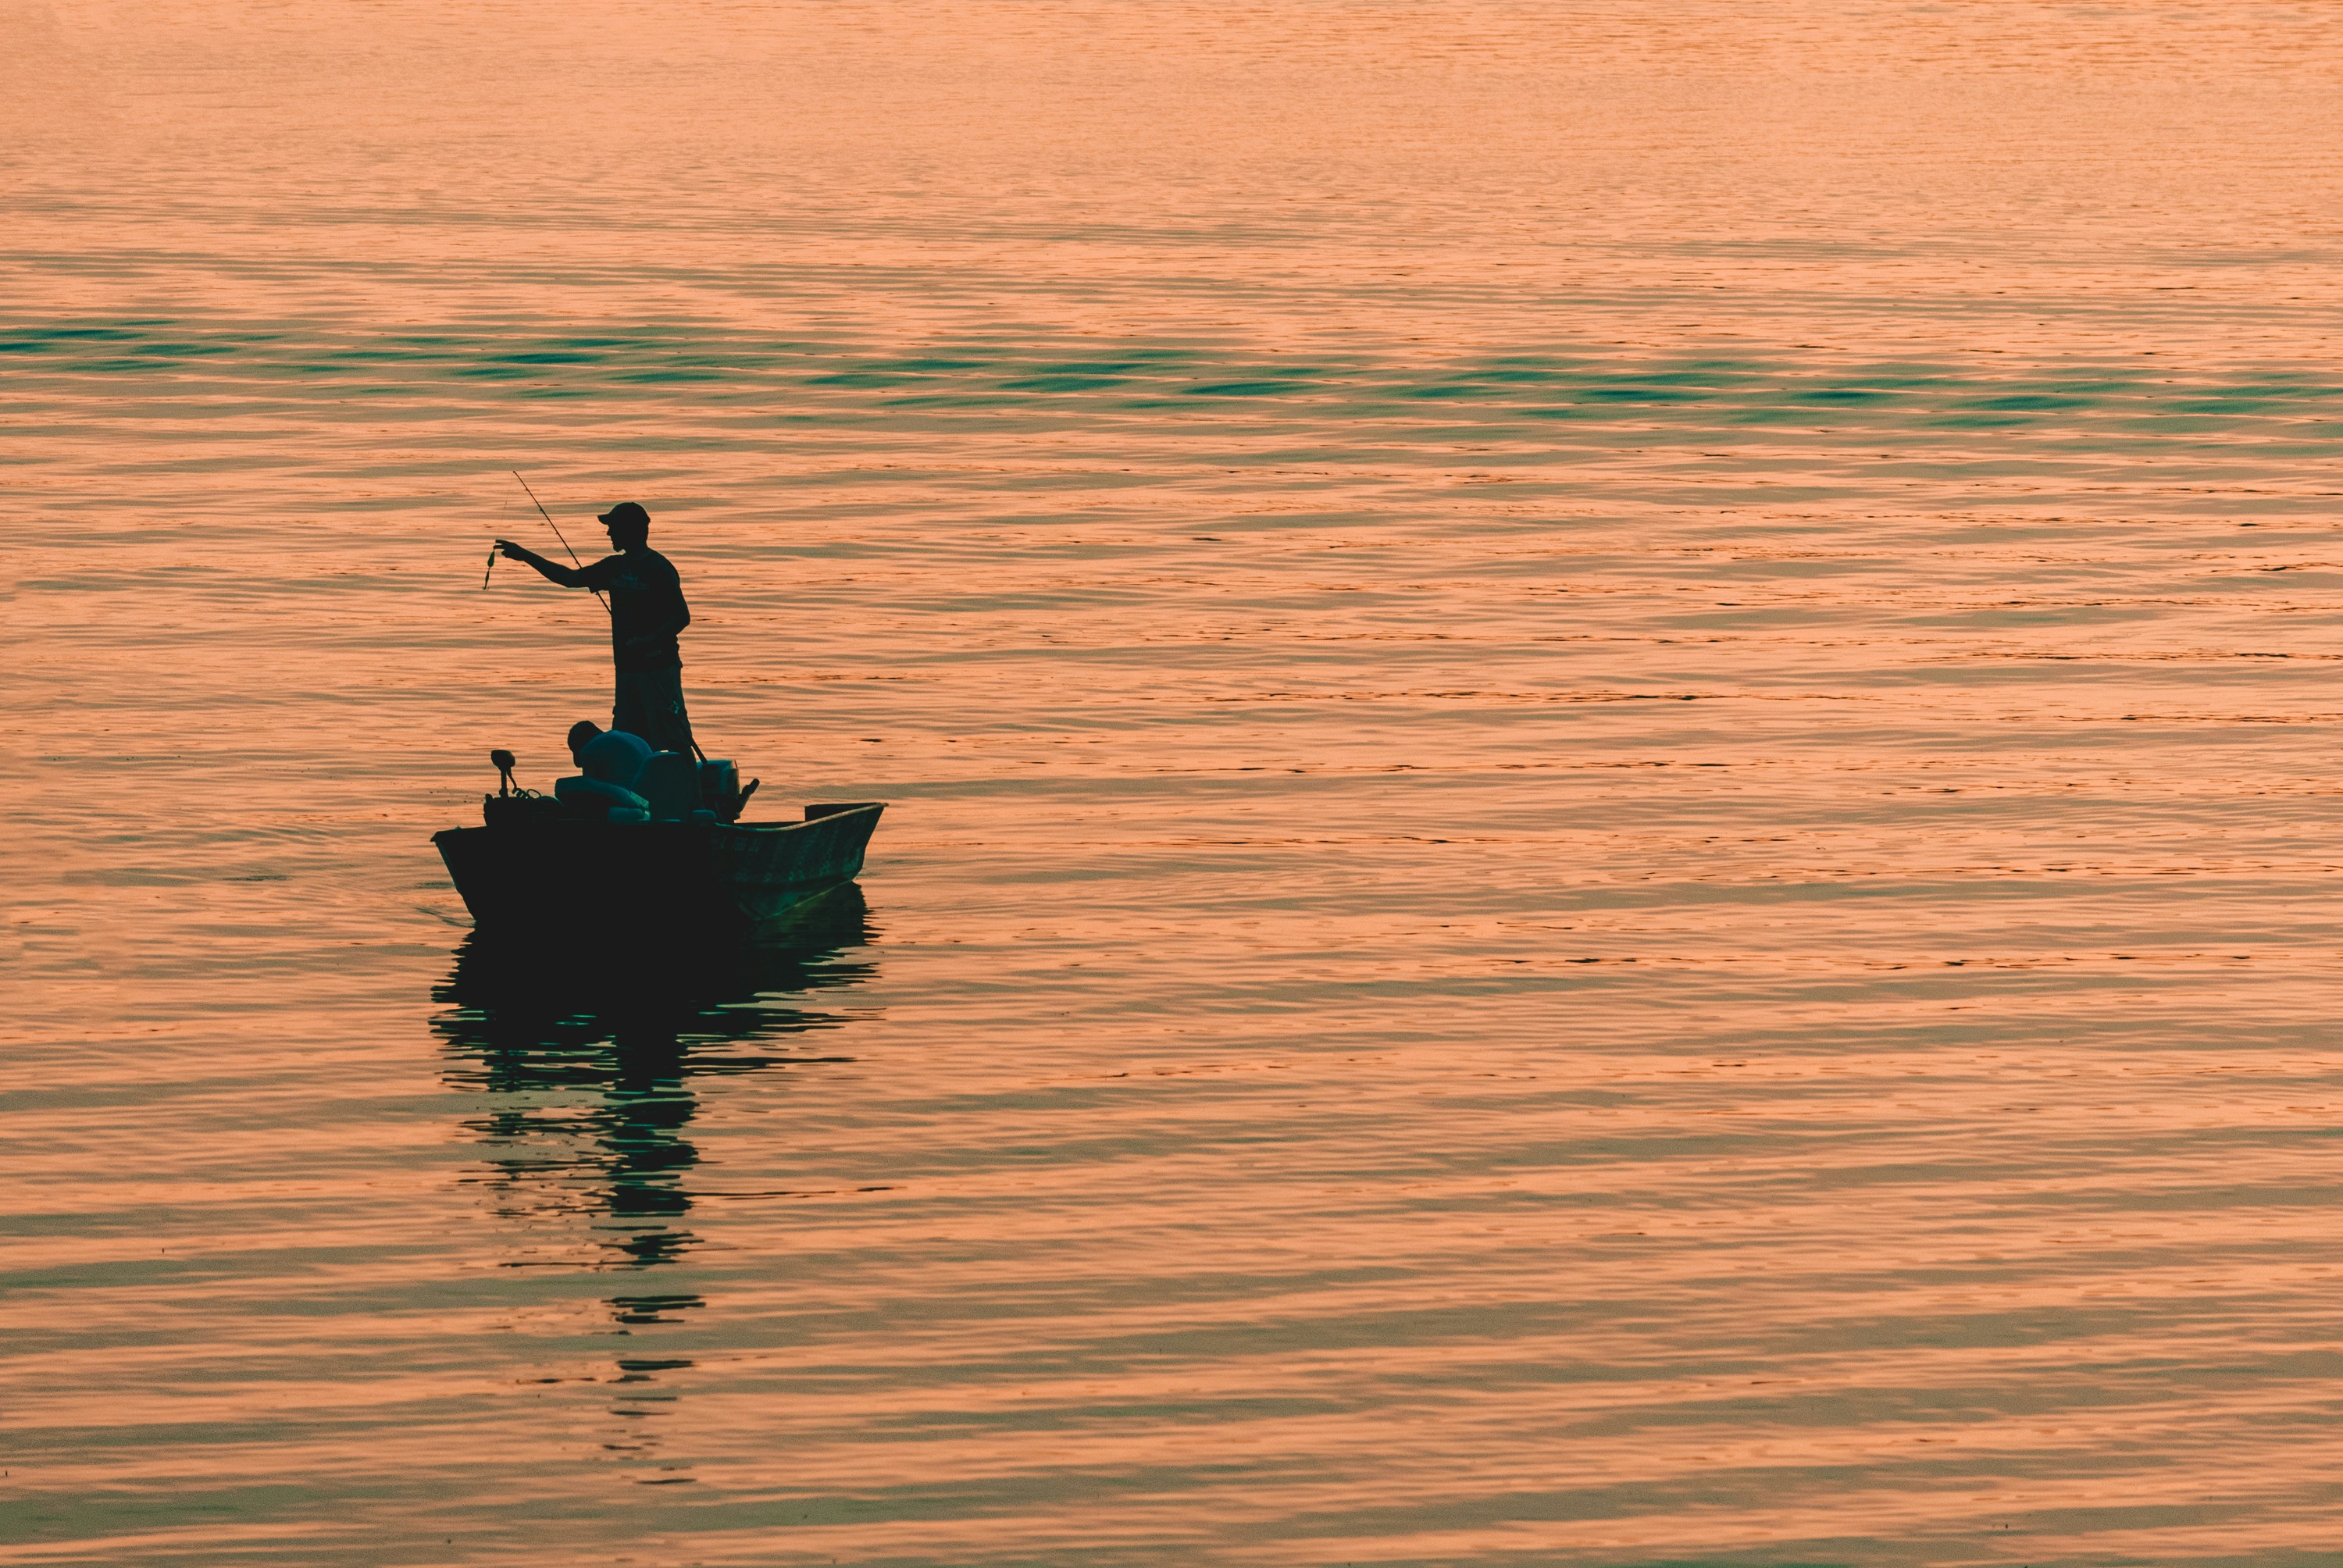 Silhouette of a person fishing on a boat at sunset